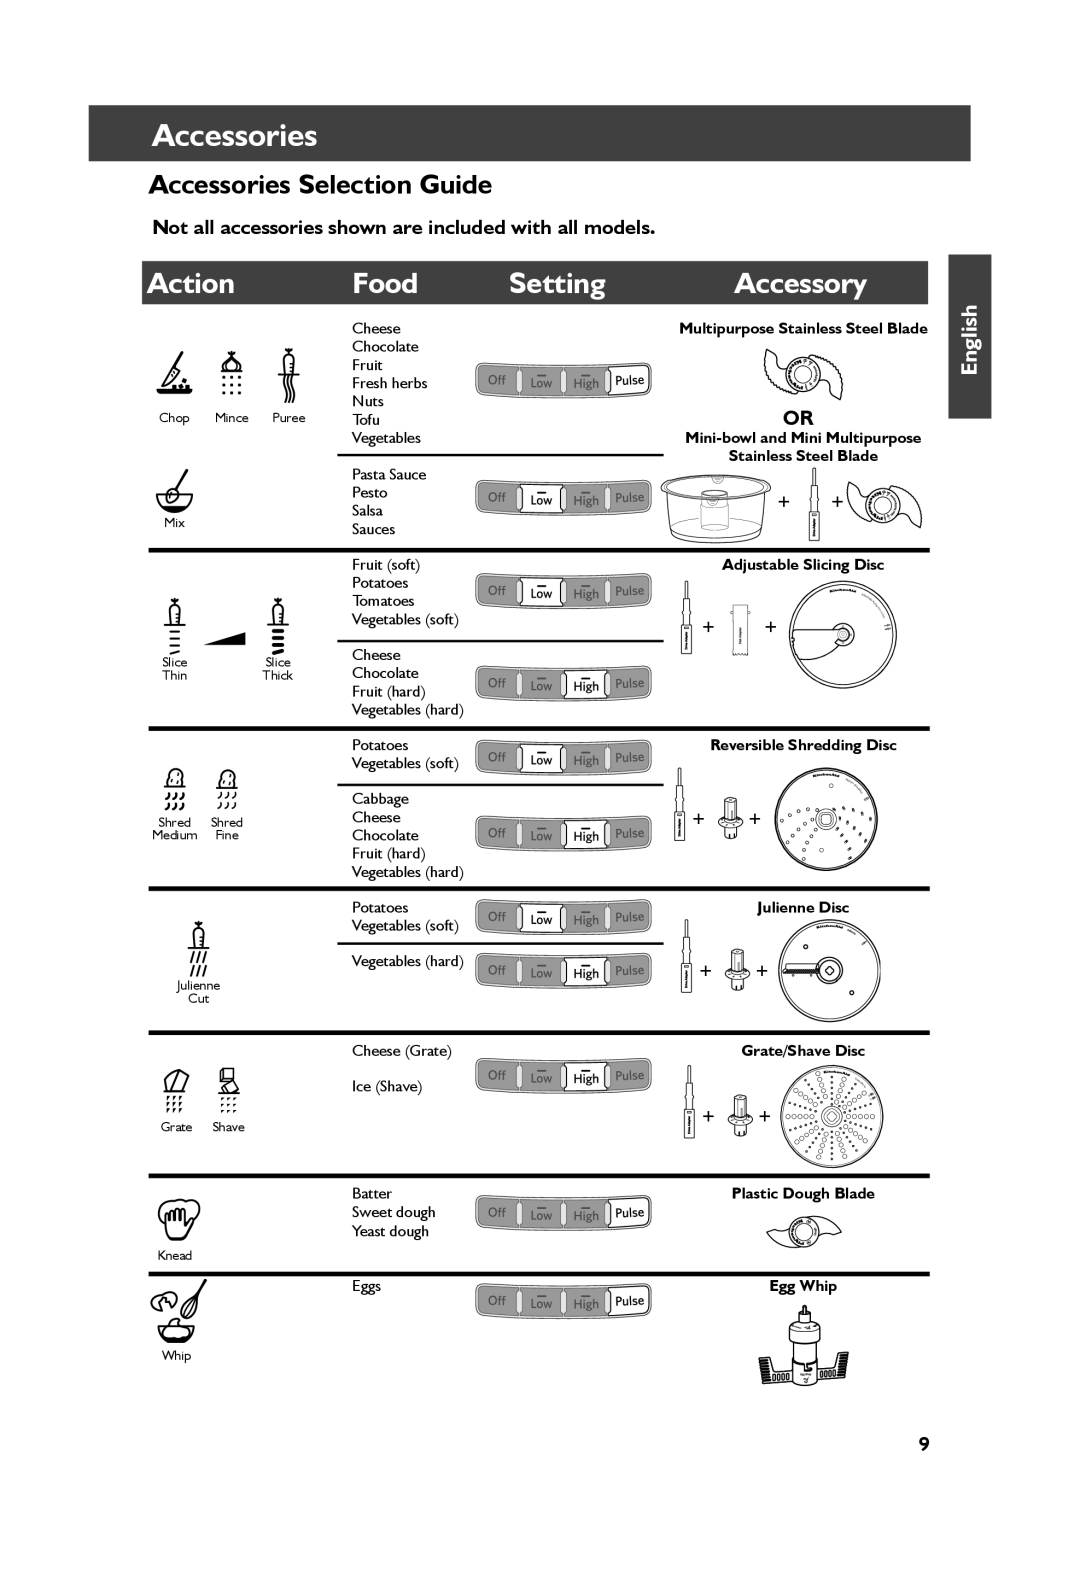 KitchenAid KFP1344 manual Action Food Setting Accessory, Accessories Selection Guide, English, + +, Adjustable Slicing Disc 